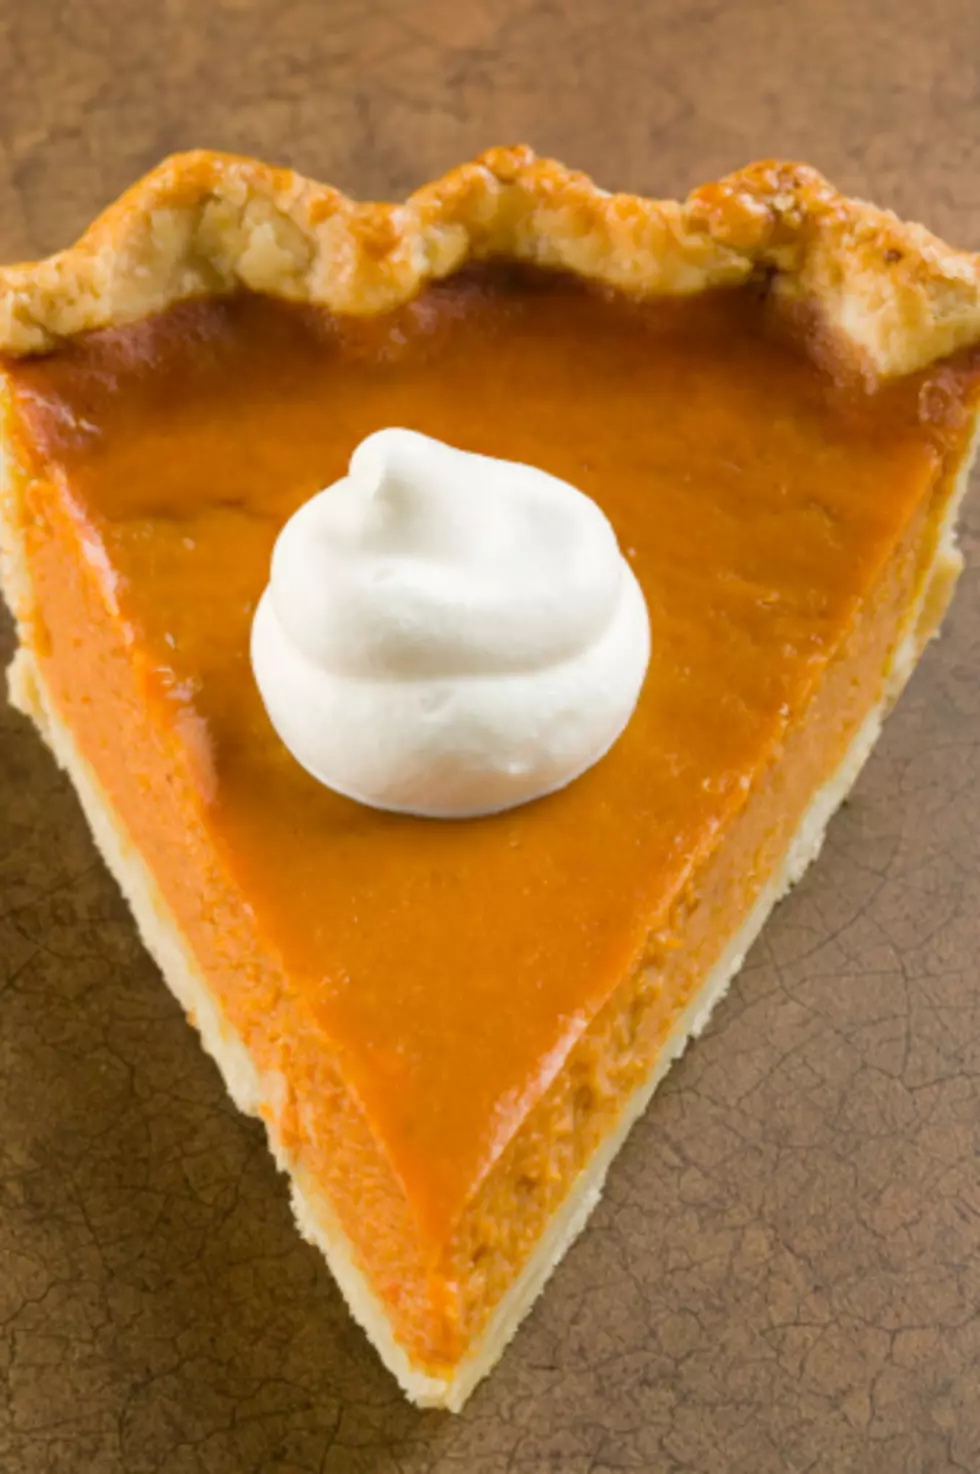 Today Is…National Pie Day!